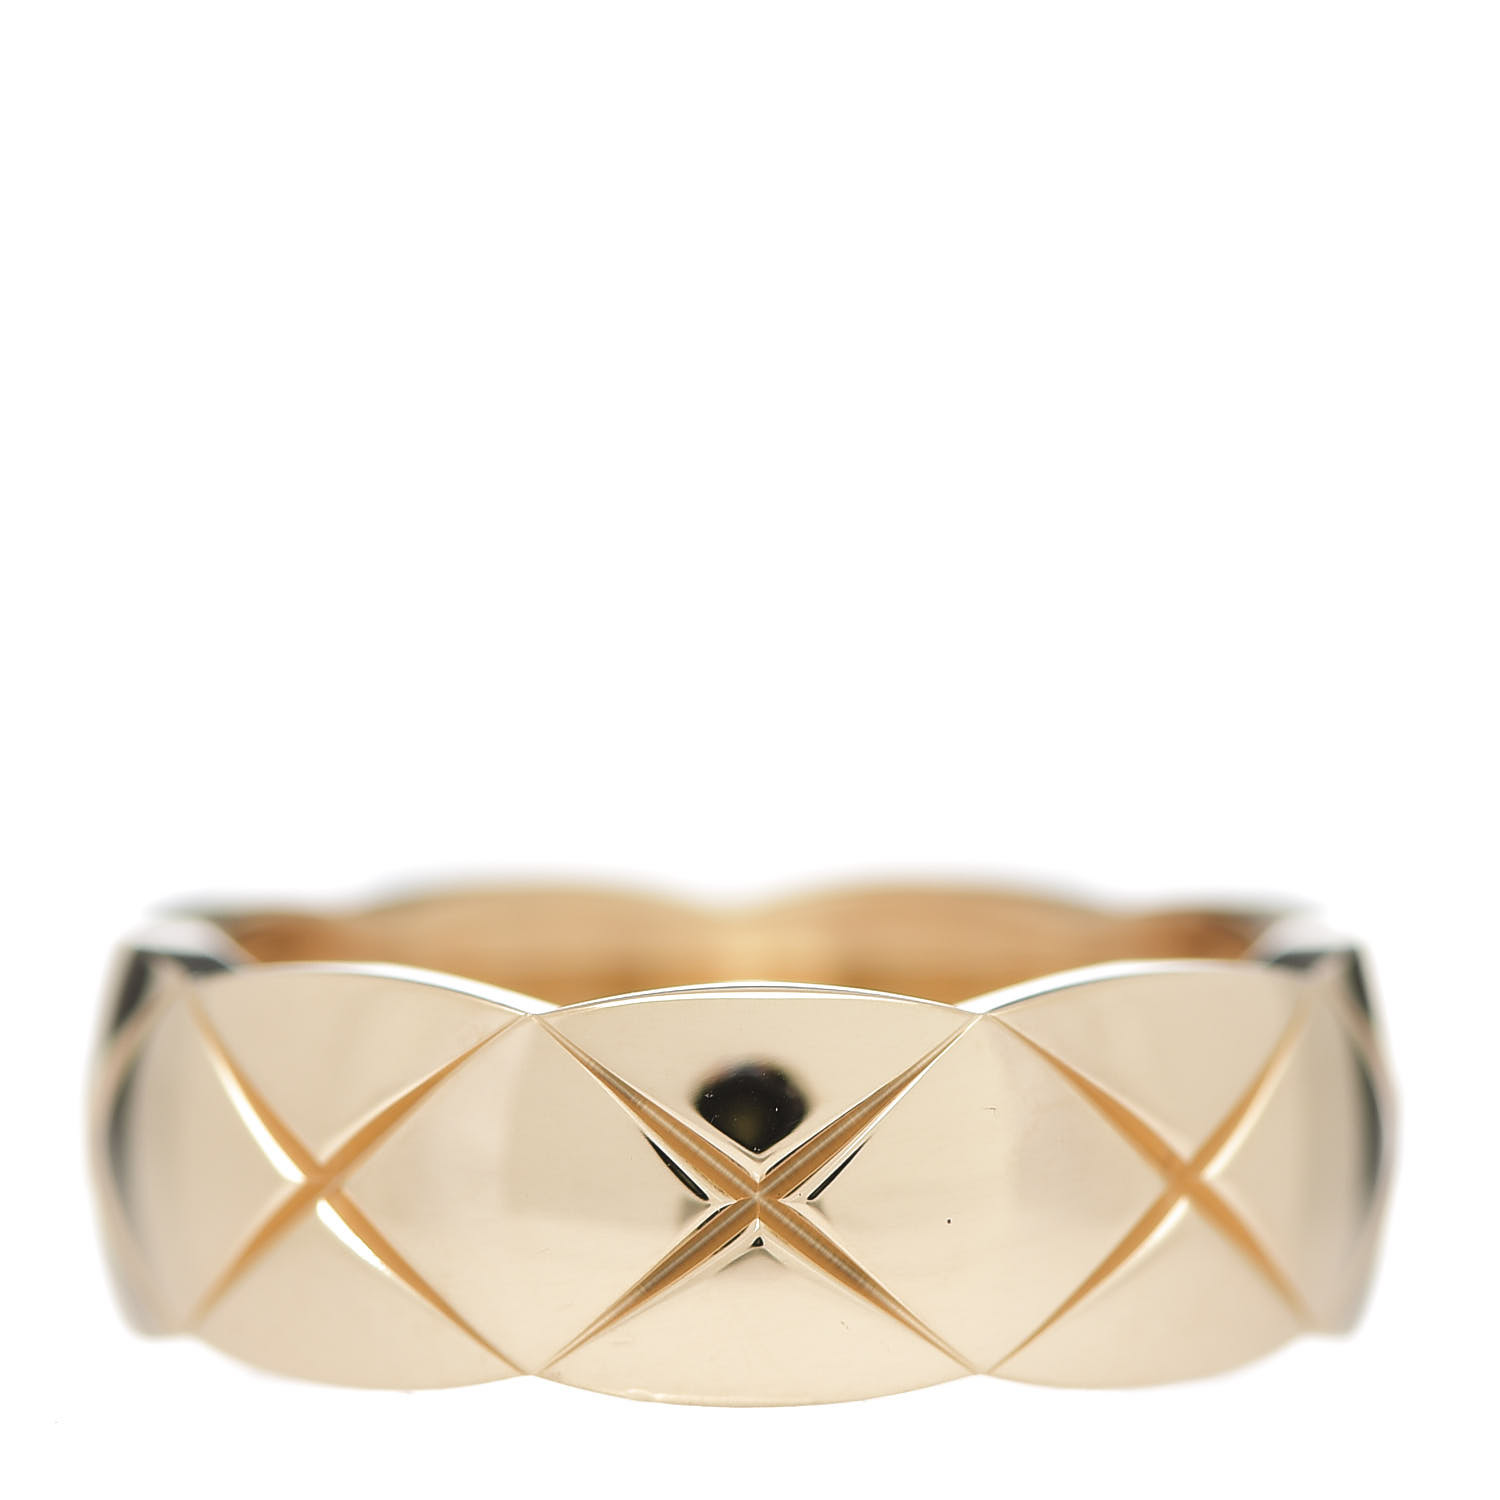 Chanel 18k Yellow Gold Small Coco Crush Ring 54 7 Fashionphile